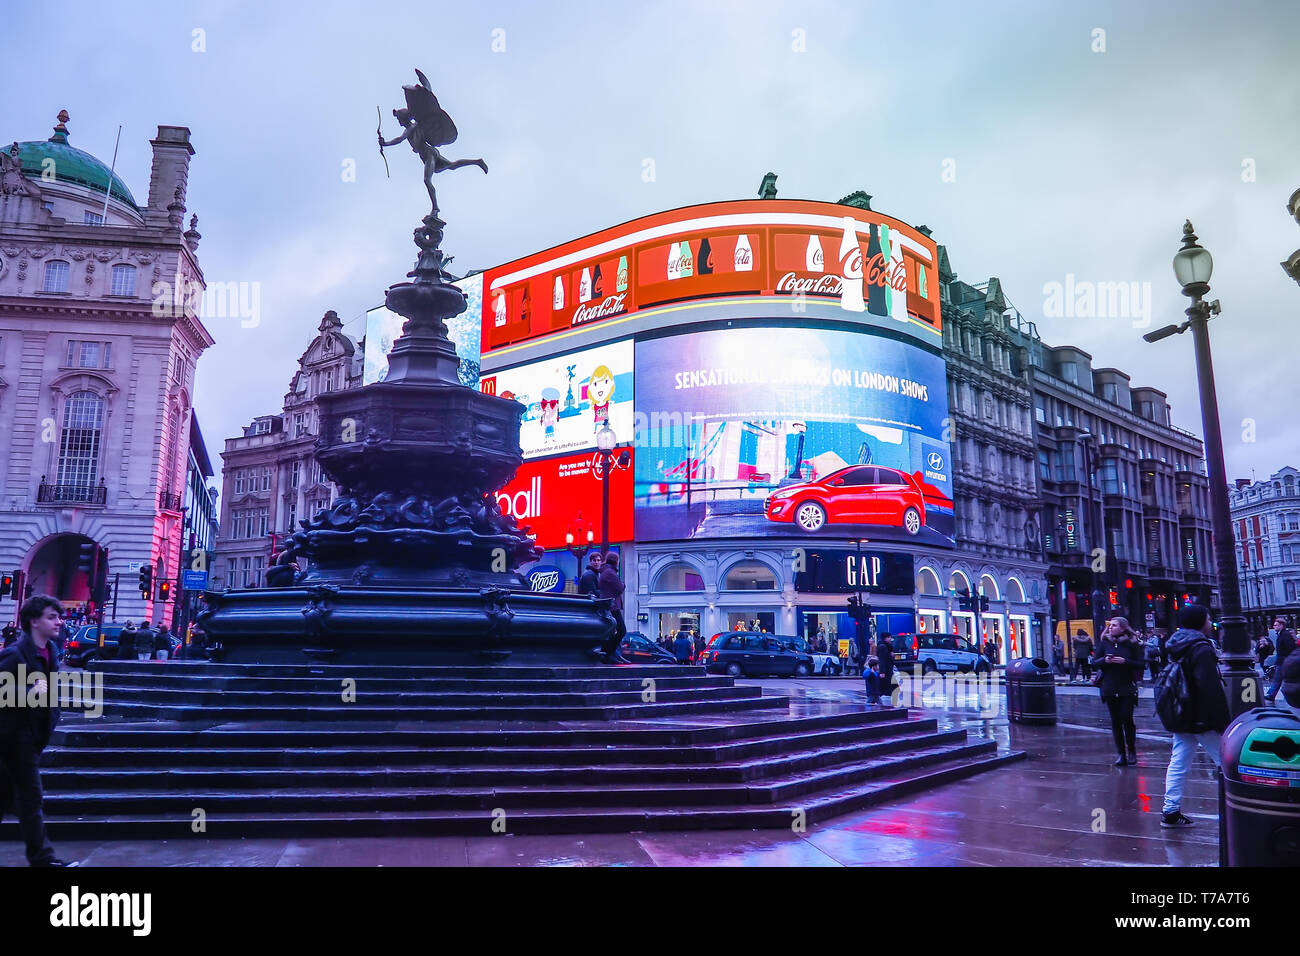 Piccadilly Circus with the Shaftesbury Memorial Fountain and advertising screens, a famous London landmark and busy destination for tourists. Stock Photo